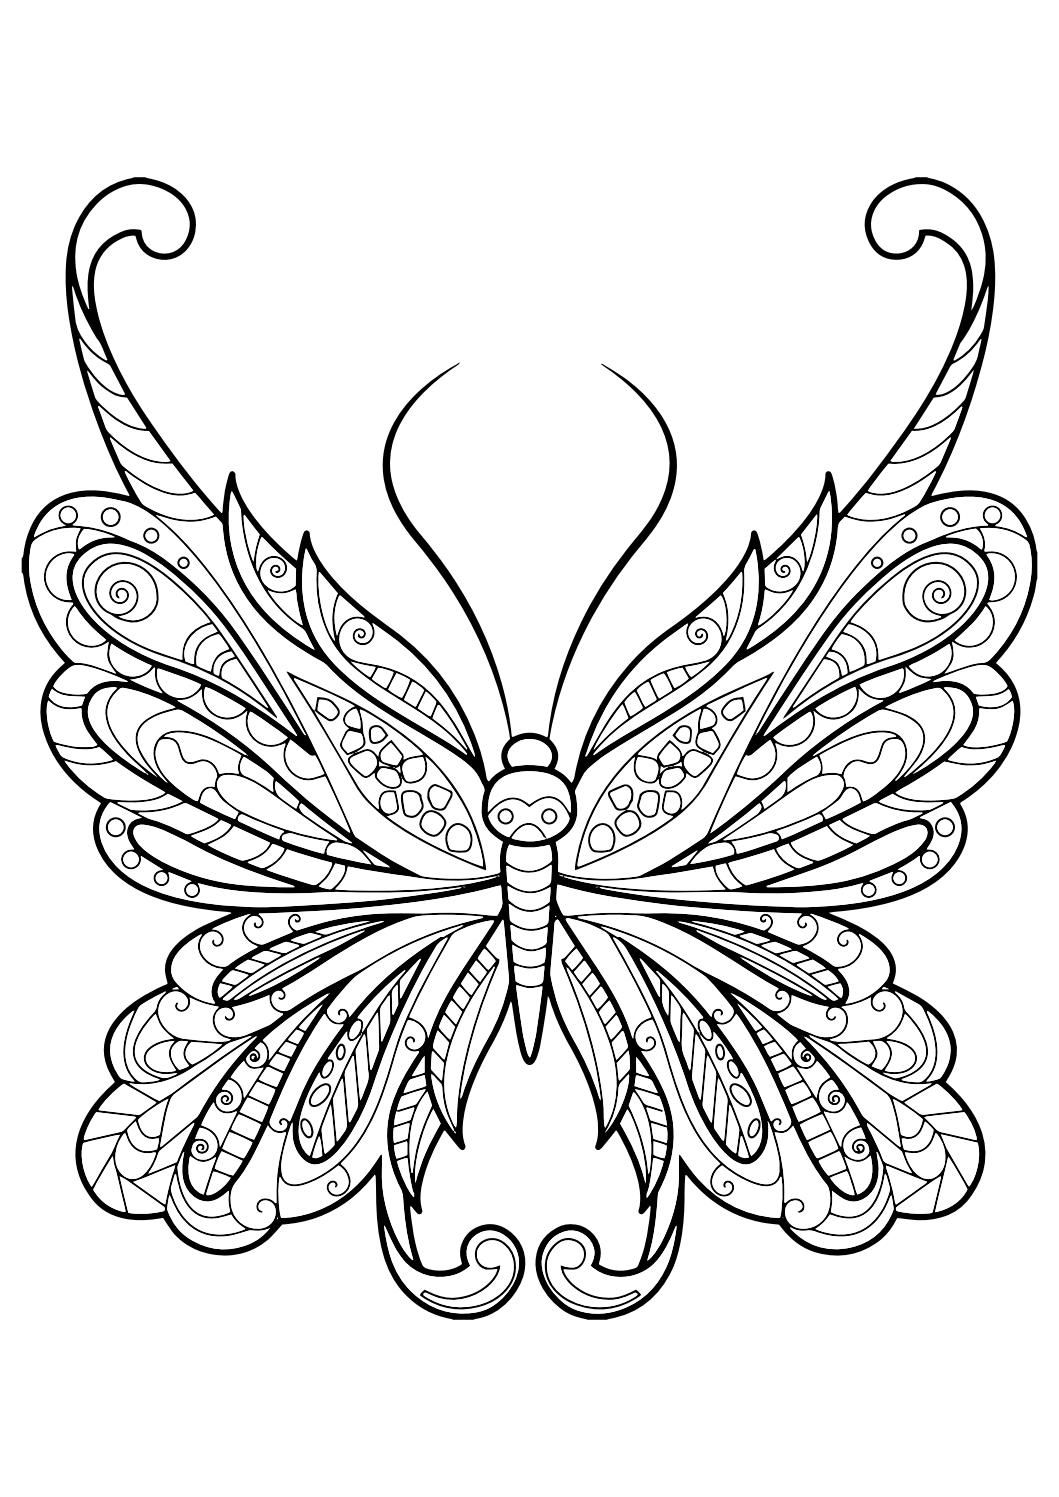 12+ Detailed Butterfly Coloring Pages For Adults – Home